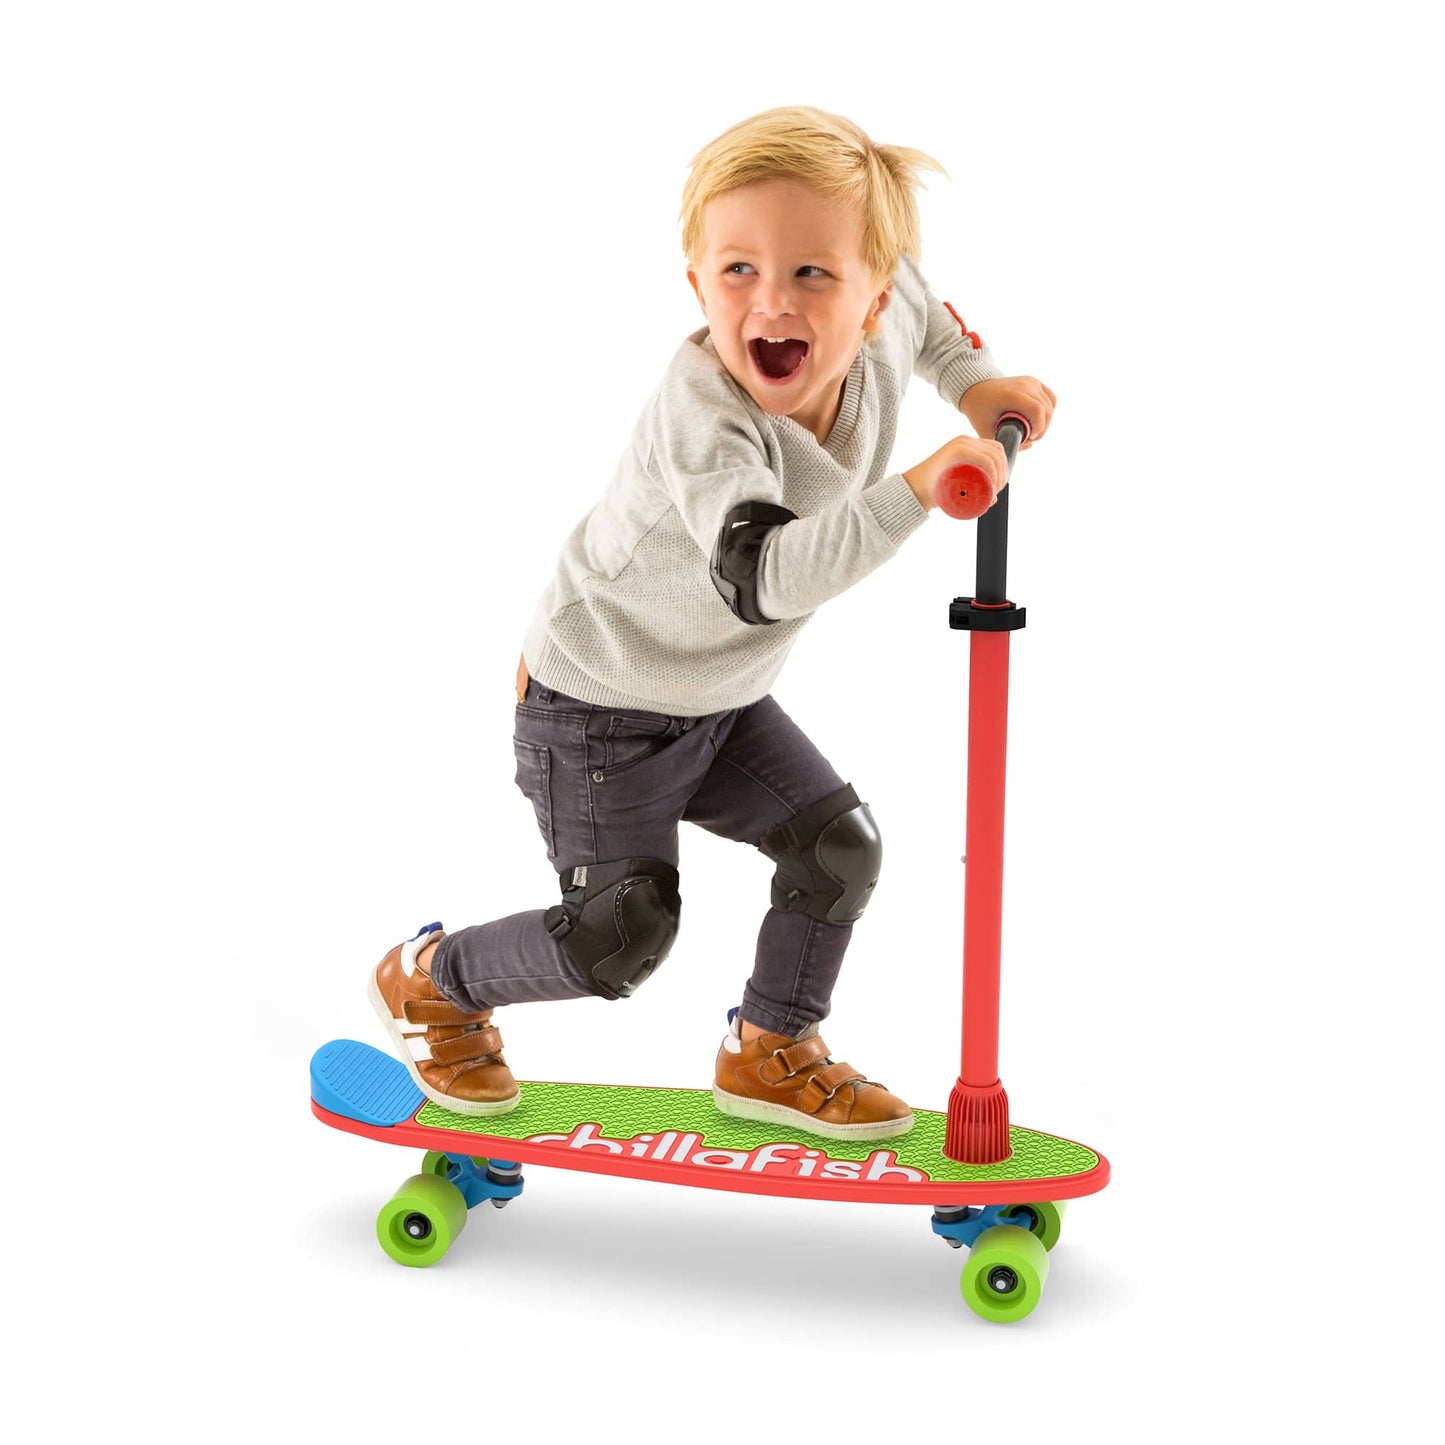 Chillafish Skatie Scoot Red Mix Age 3+ - The Online Toy Shop4